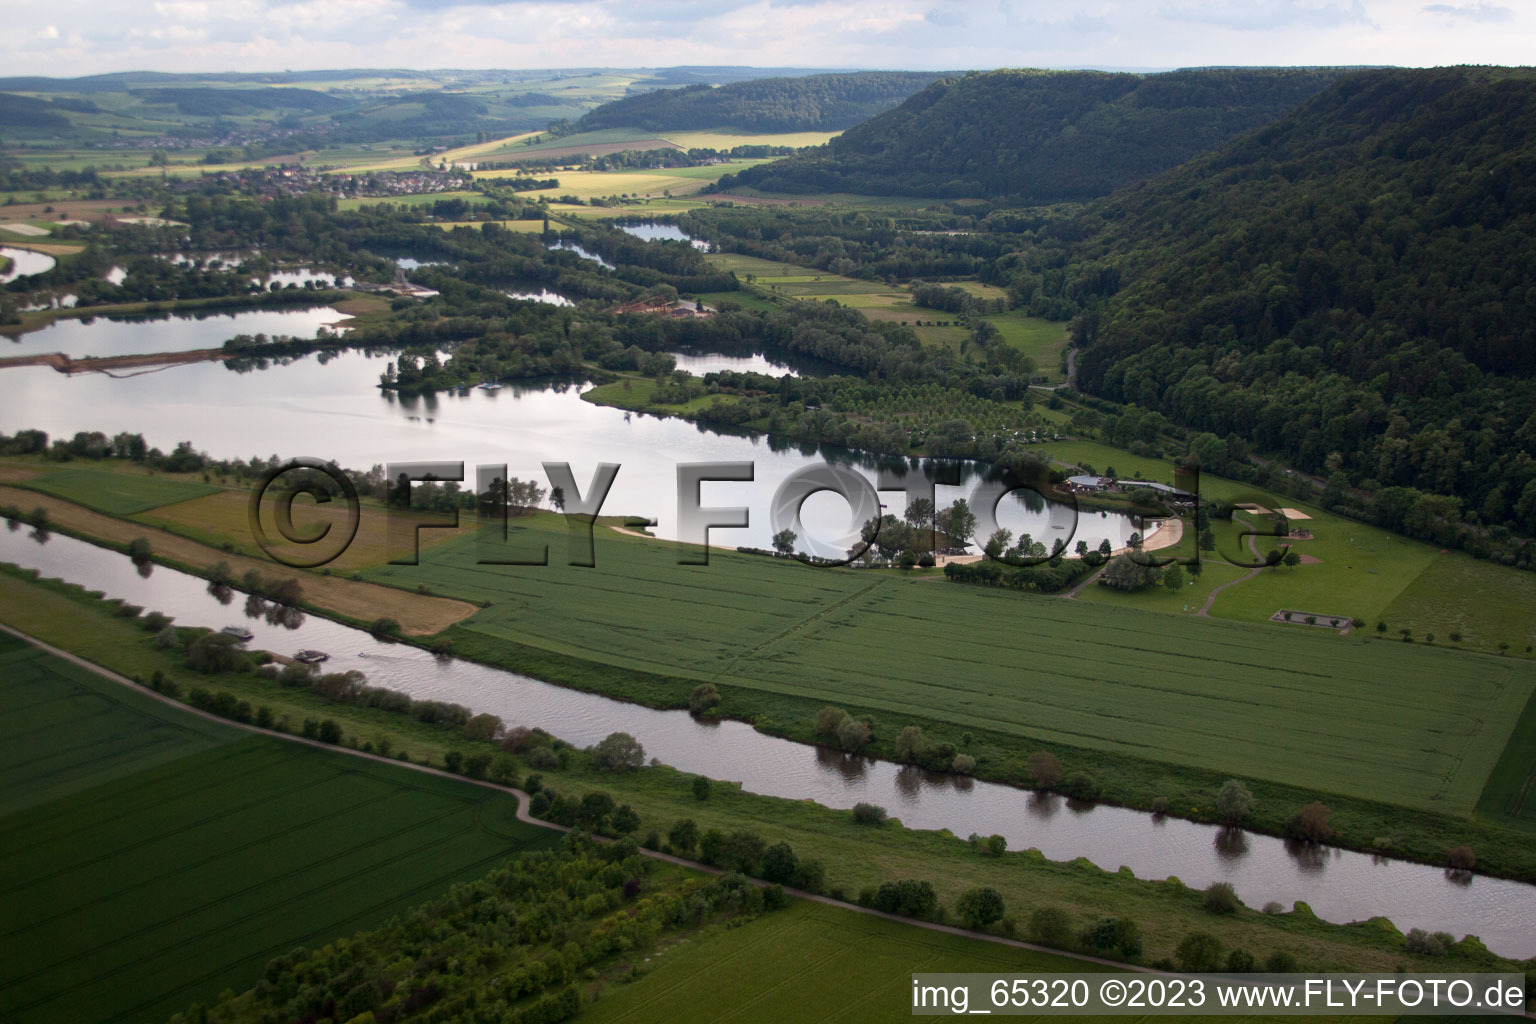 Höxter in the state North Rhine-Westphalia, Germany from above